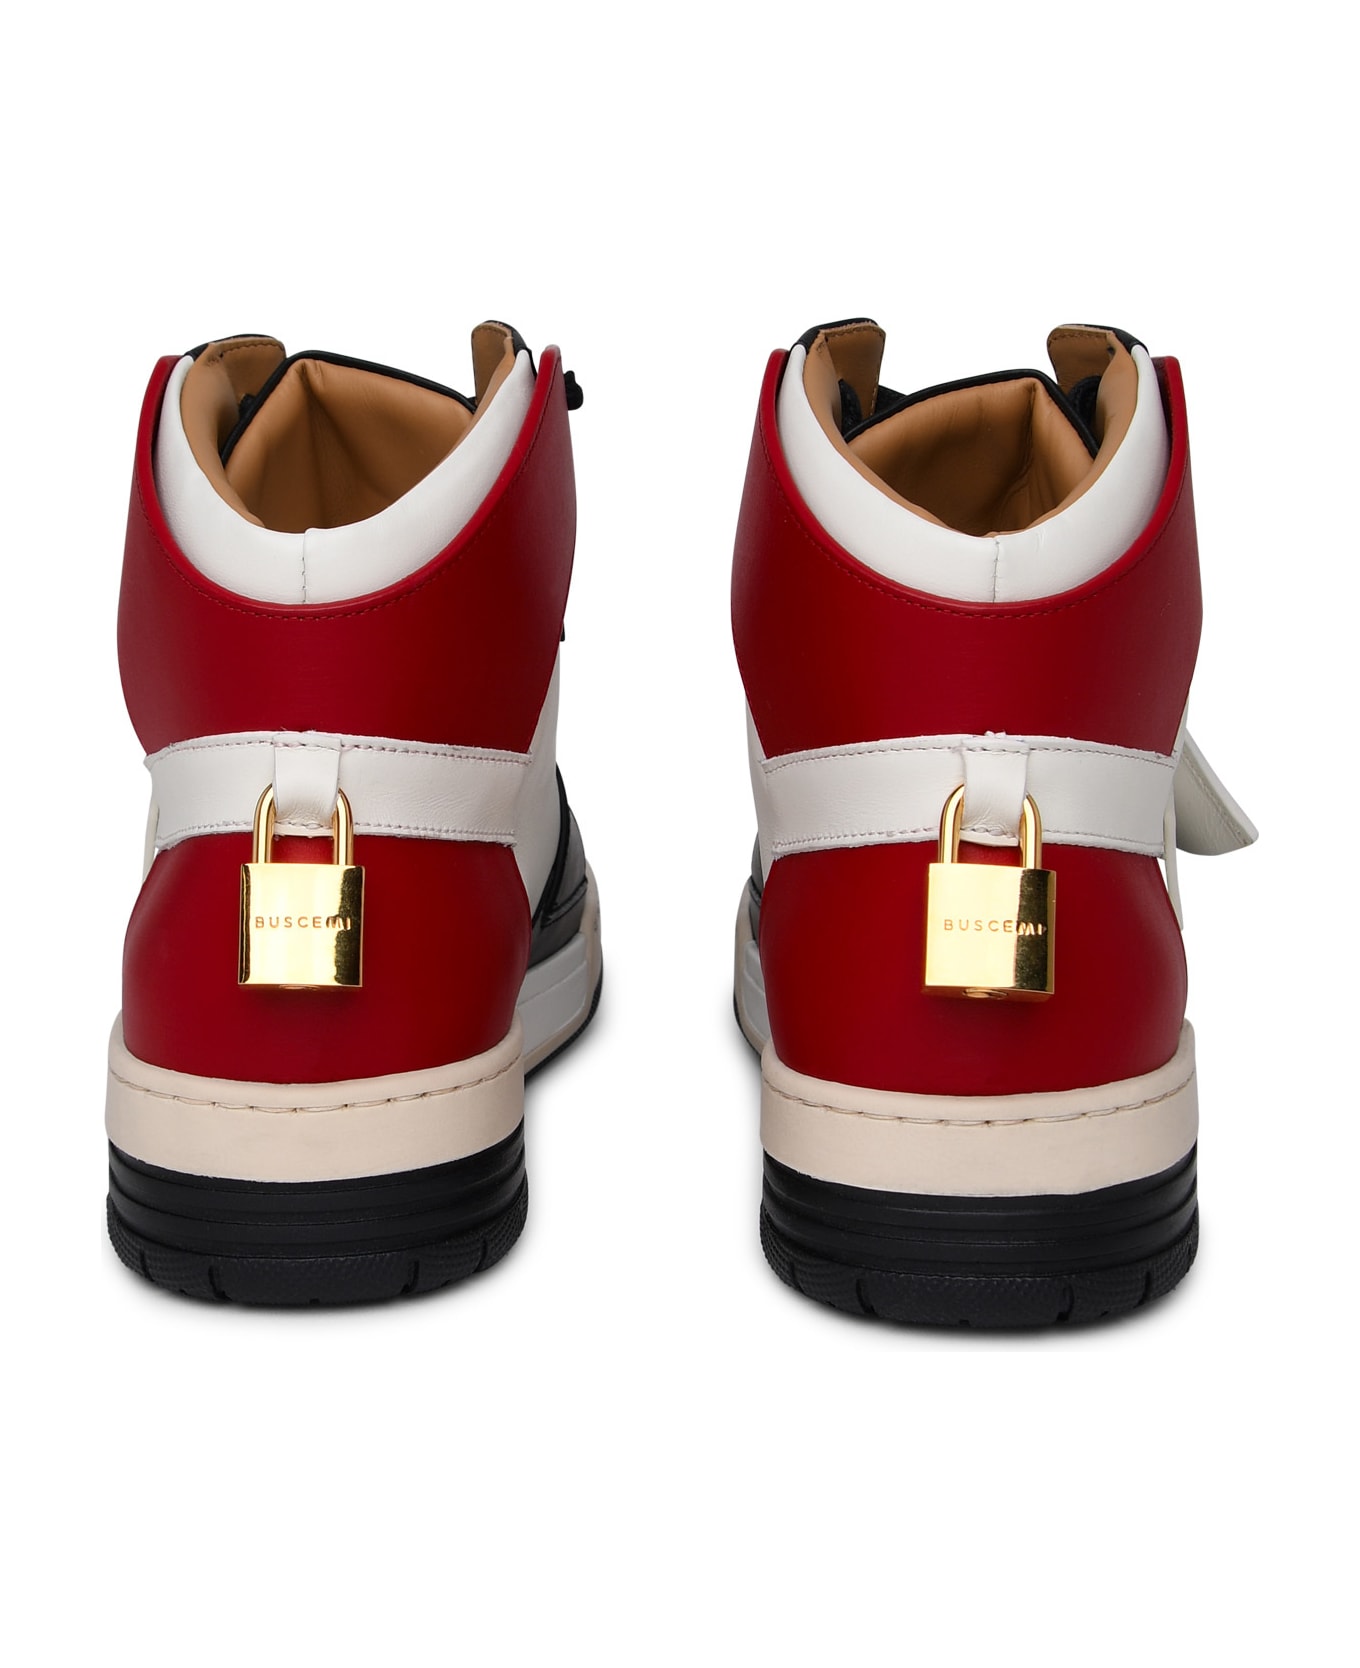 Buscemi 'air Jon' Red And White Leather Sneakers - White スニーカー